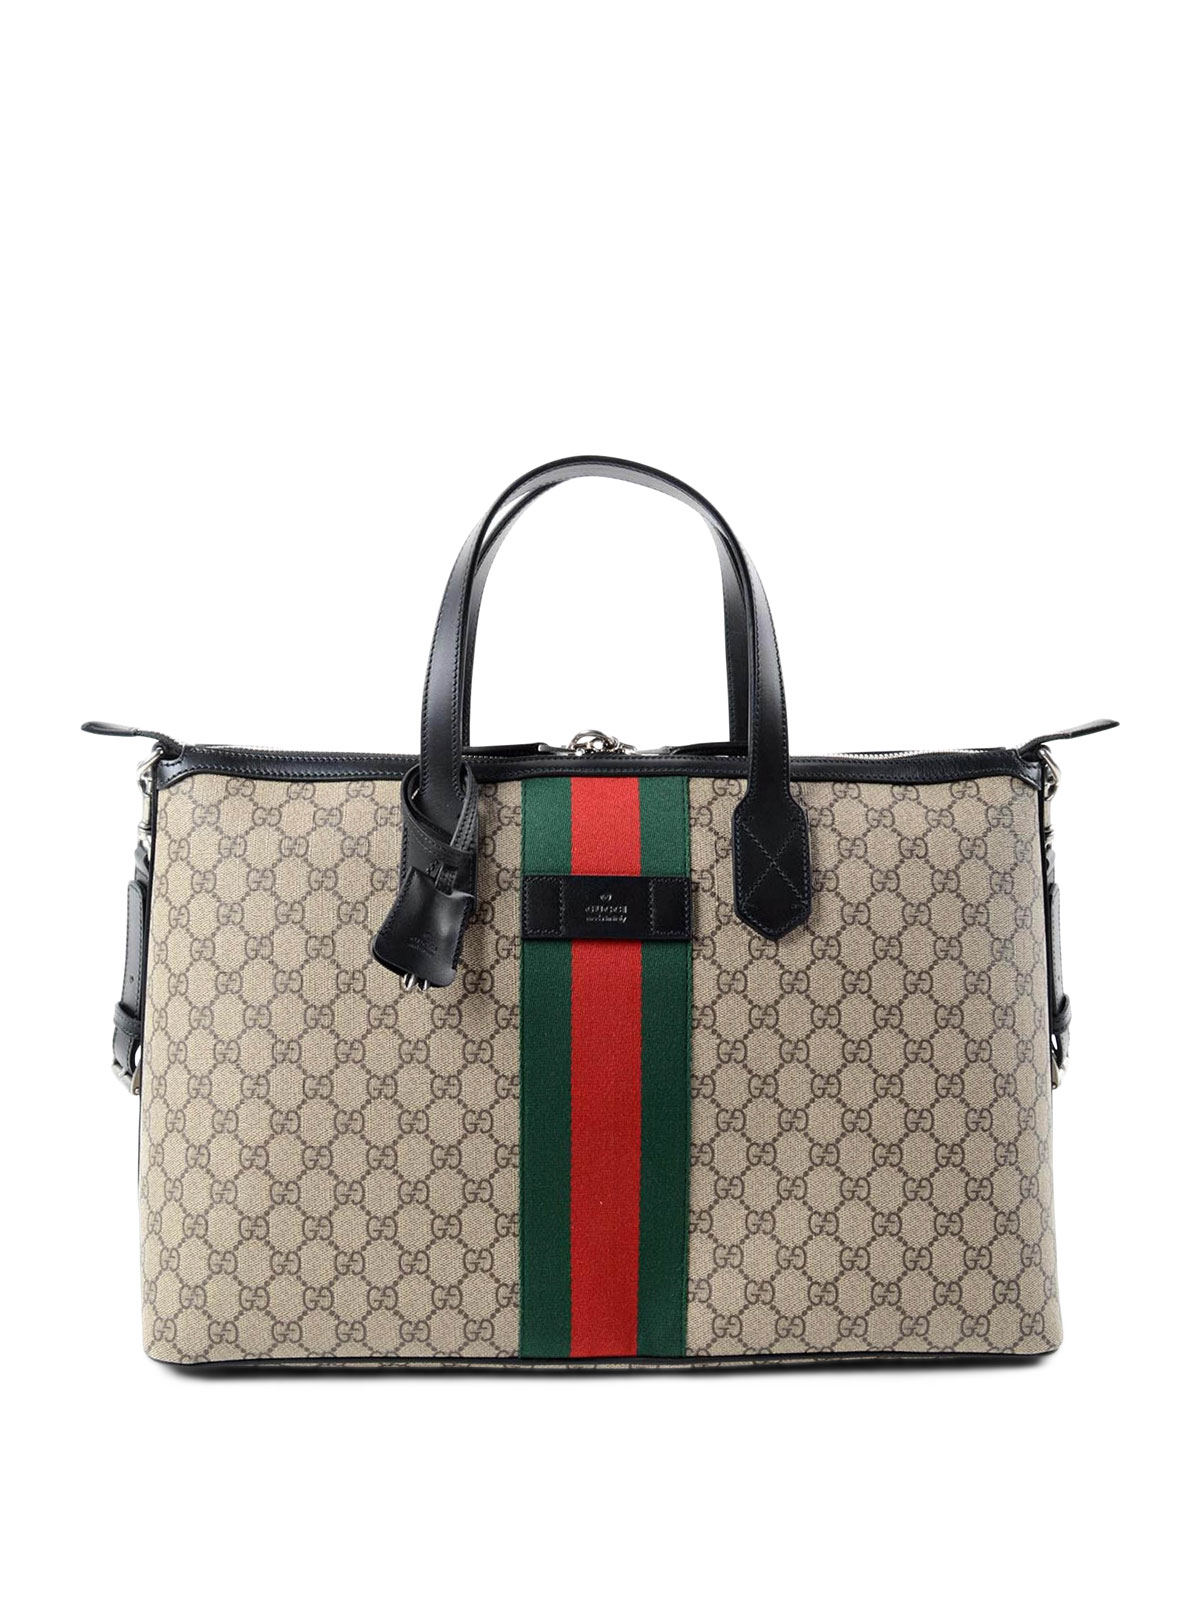 Gucci - GG Supreme canvas duffle bag - Luggage & Travel bags - 359261KHNGN9692